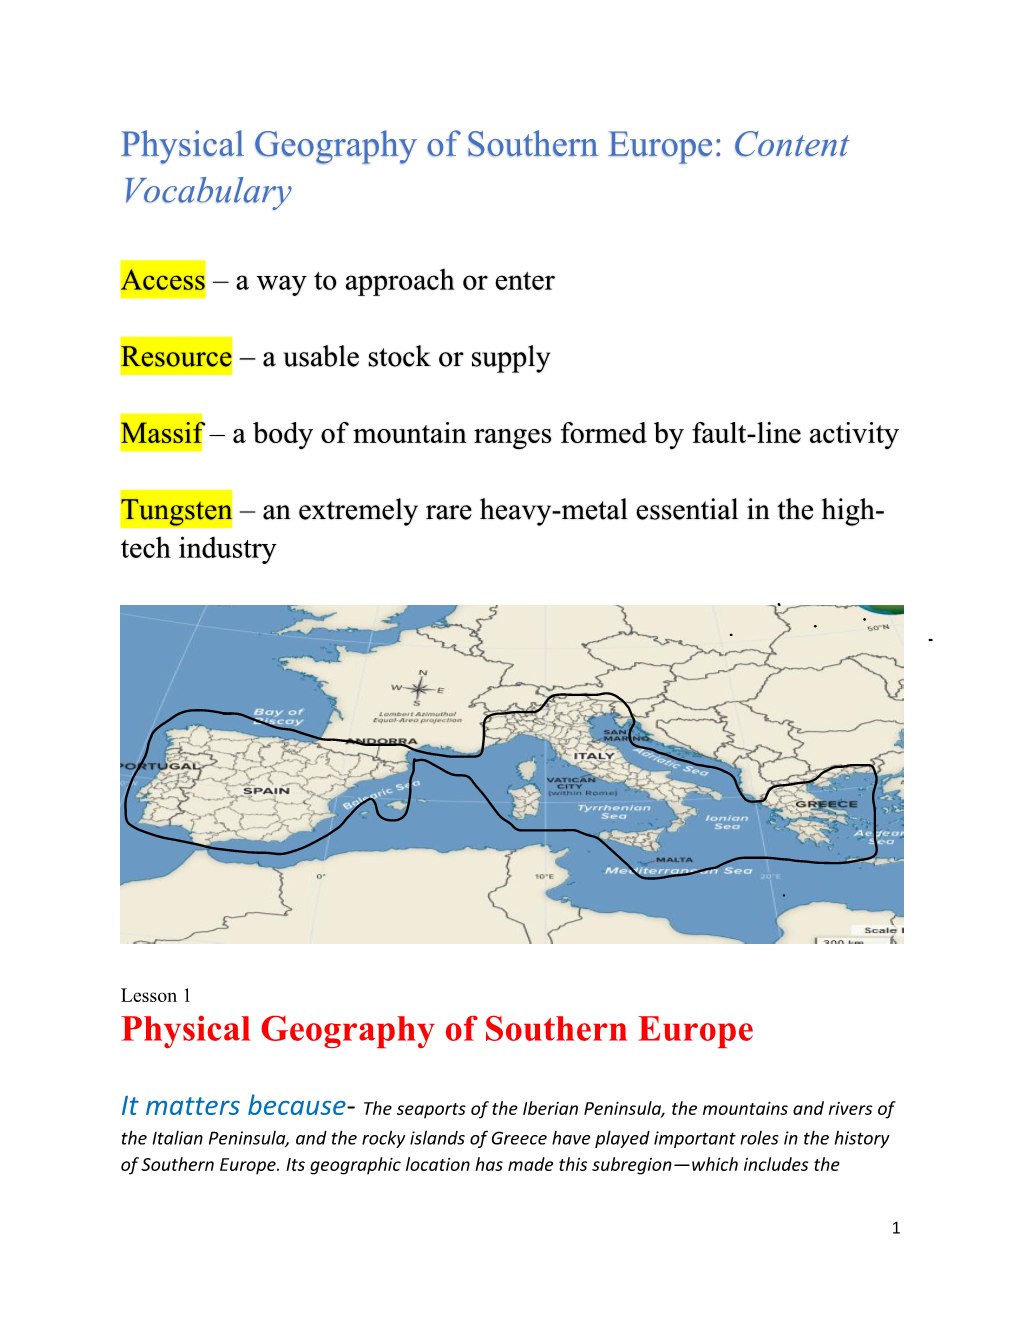 Content Vocabulary Physical Geography of Southern Europe